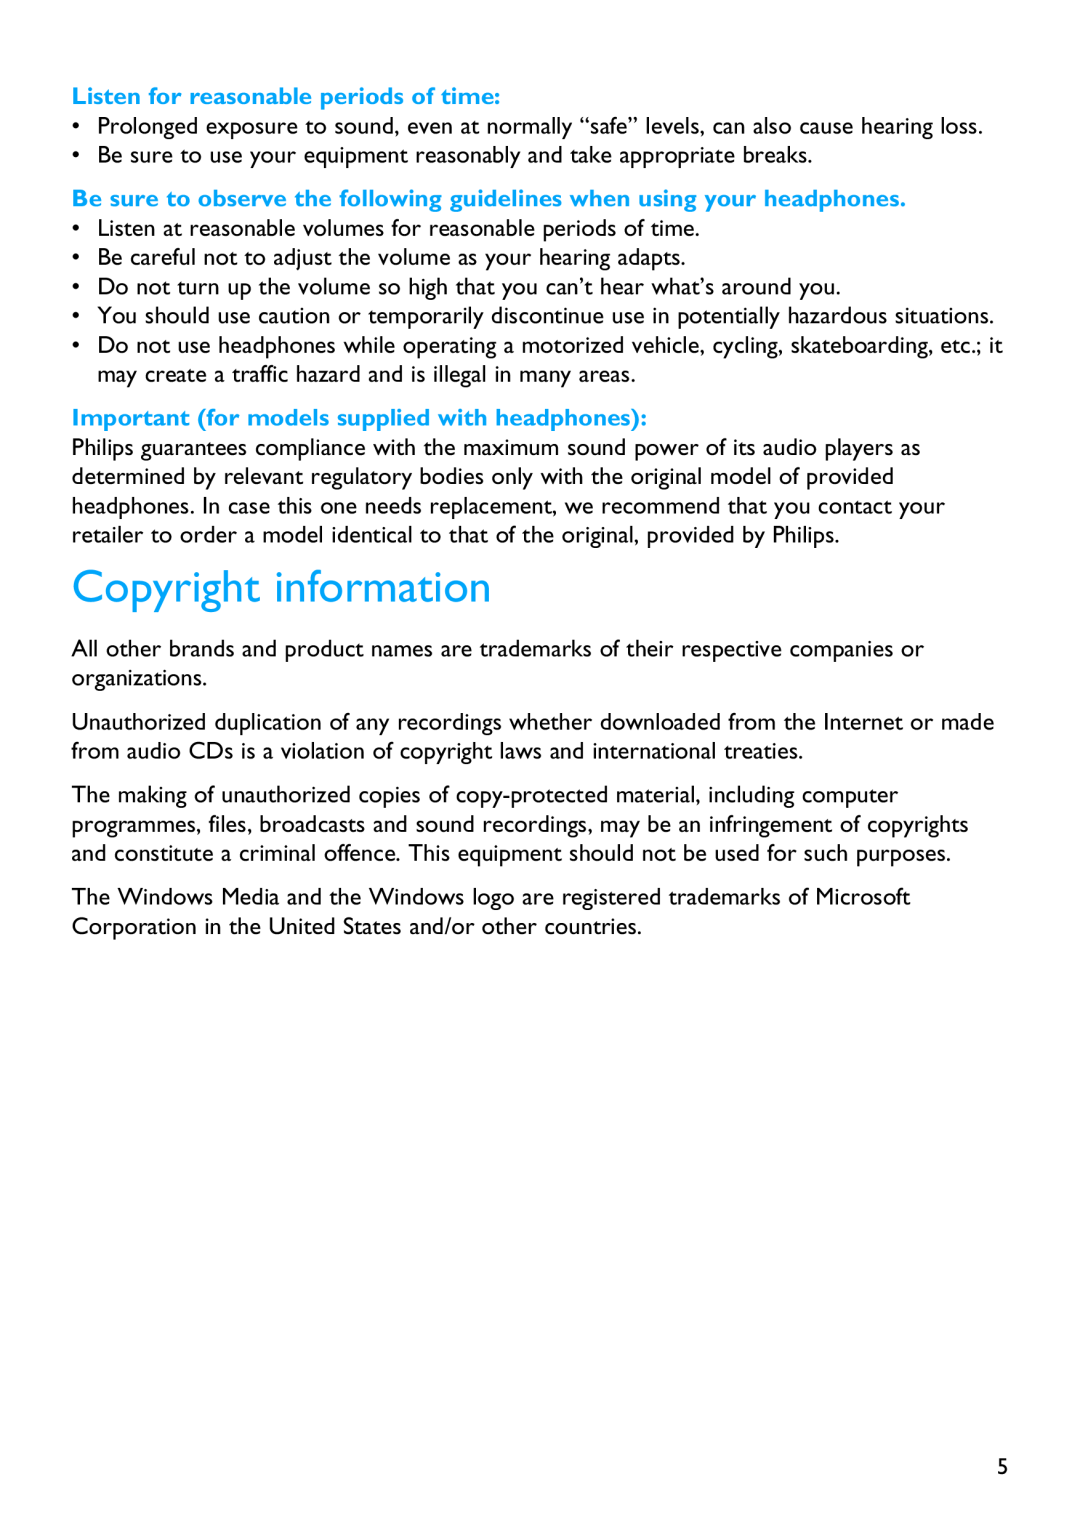 Philips SA2114 Copyright information, Listen for reasonable periods of time, Important for models supplied with headphones 